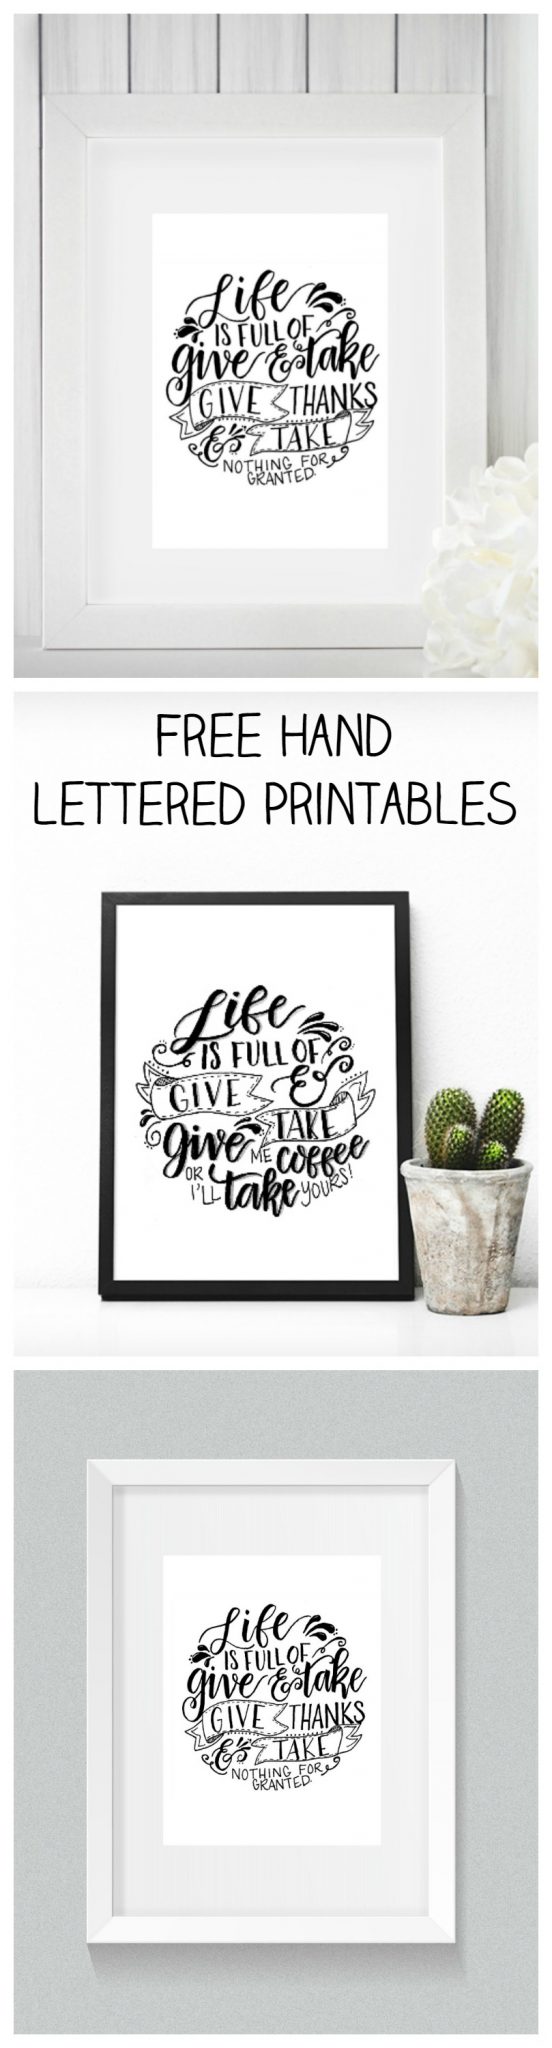 Free Hand Lettered Printables